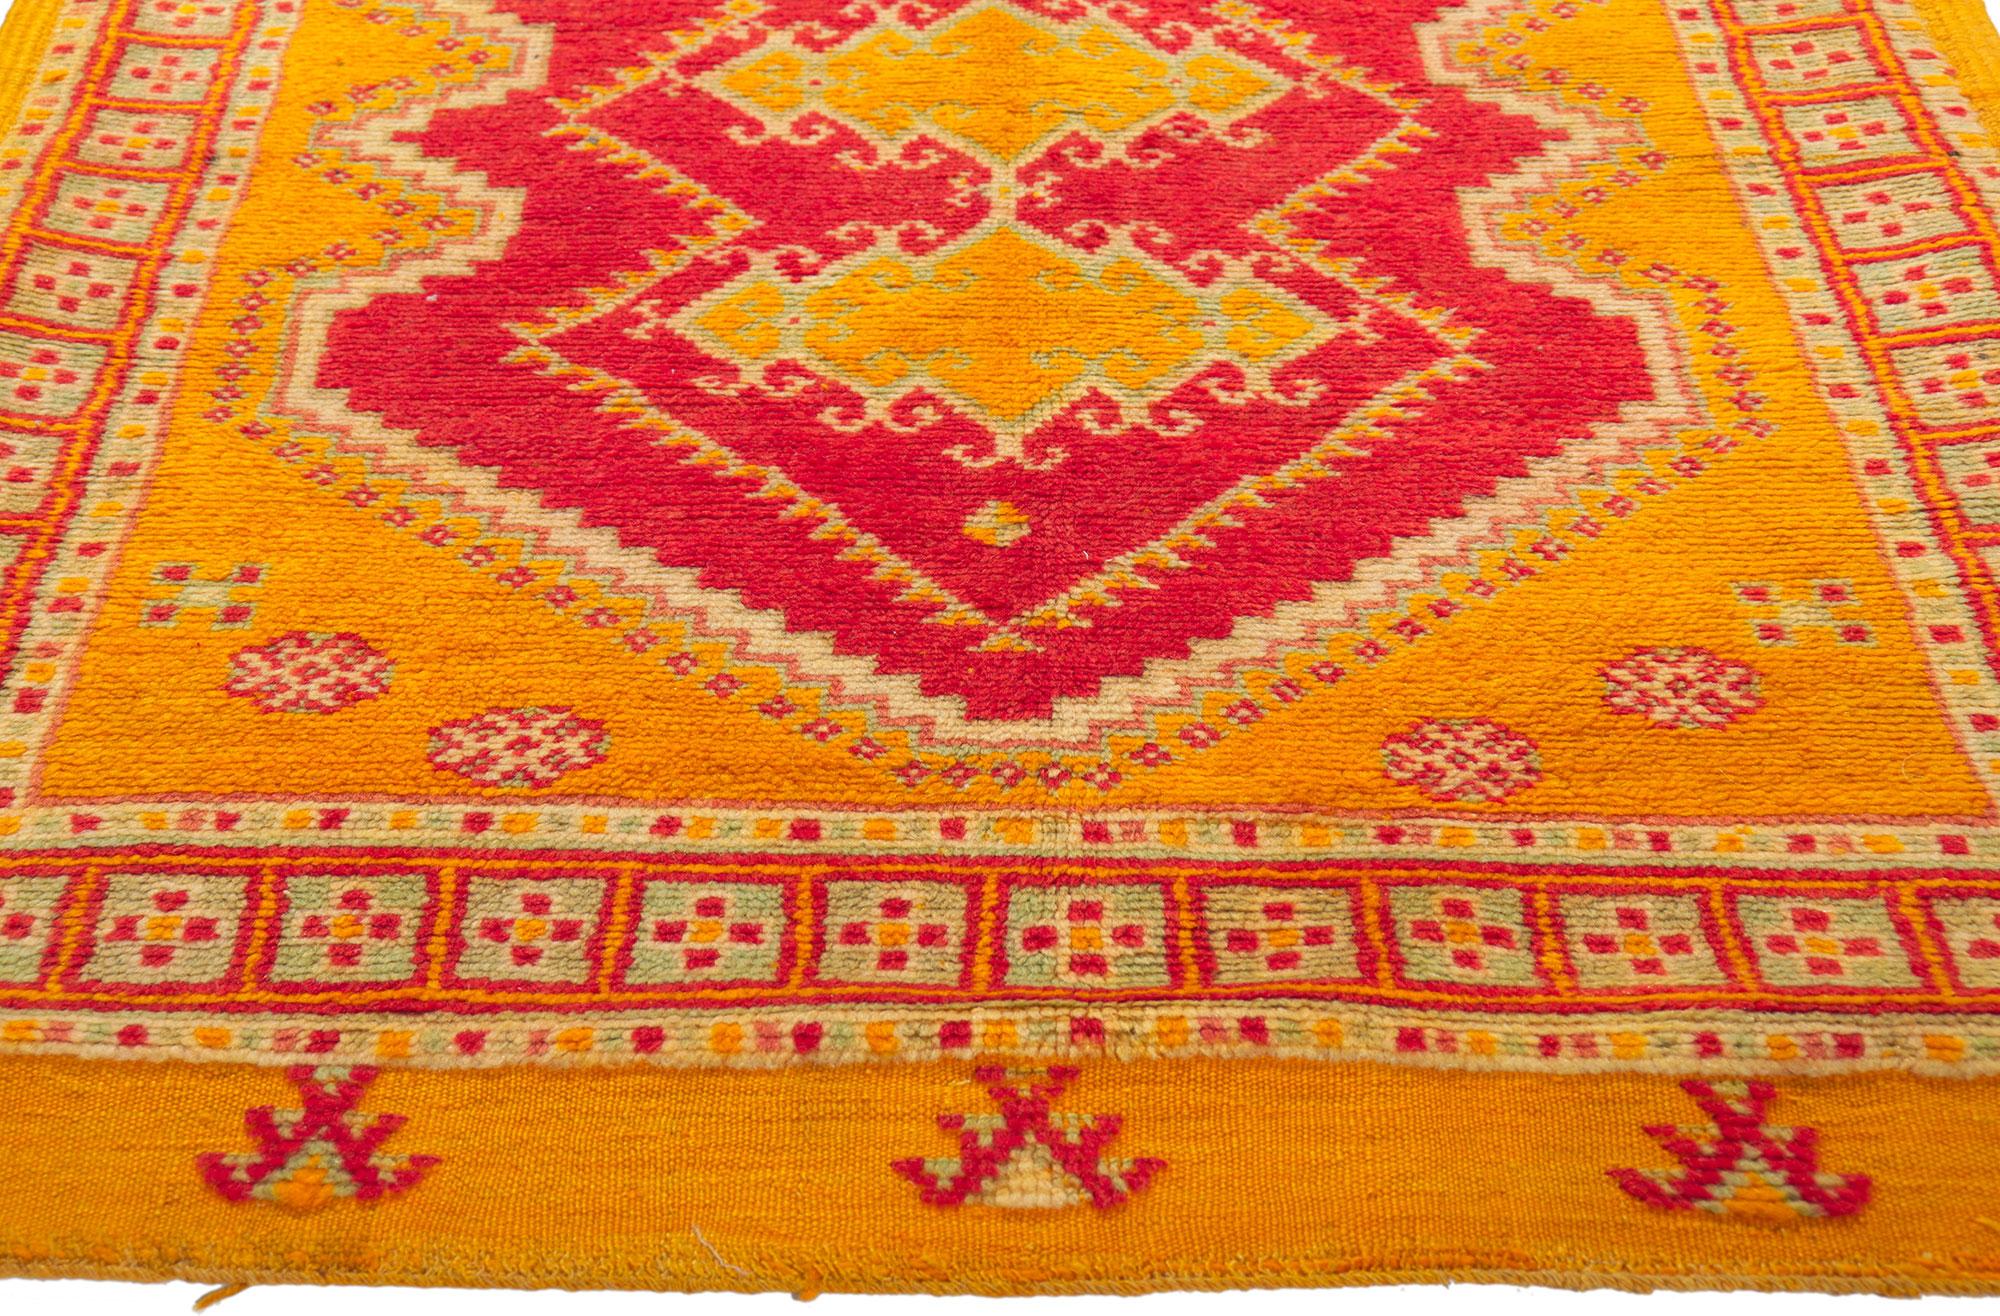 Hand-Knotted Vintage Moroccan Rug by Berber Tribes of Morocco For Sale